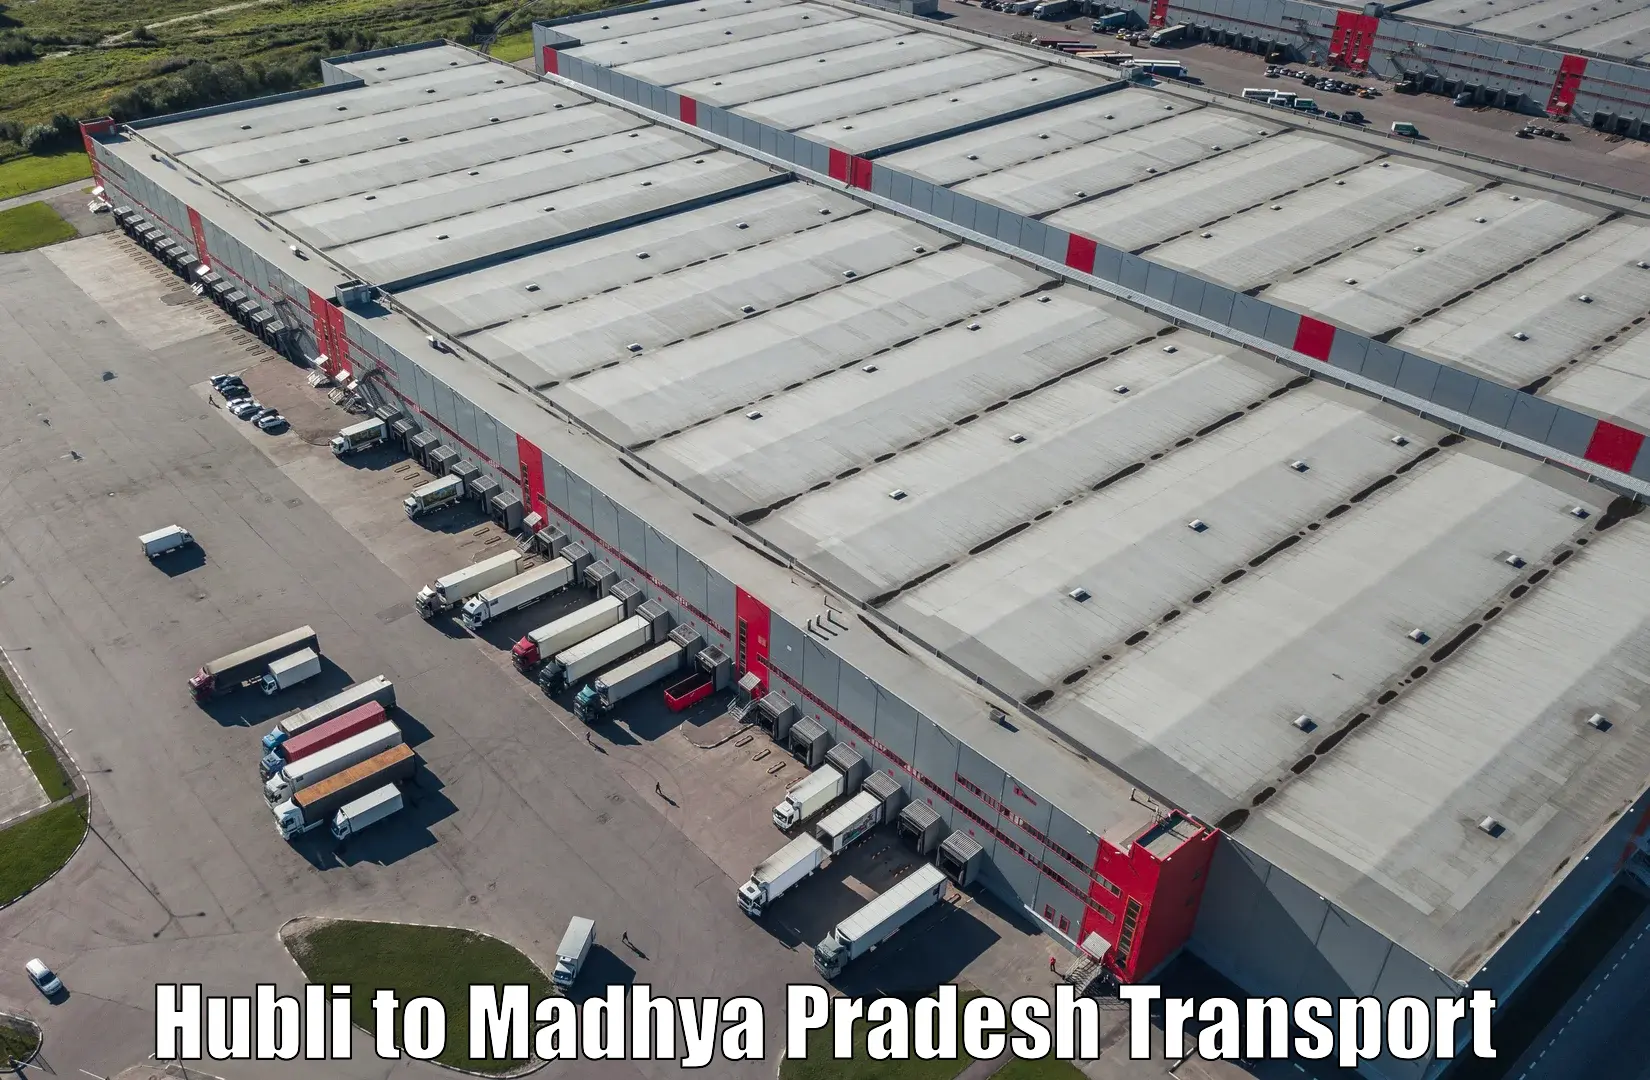 Parcel transport services Hubli to Nainpur